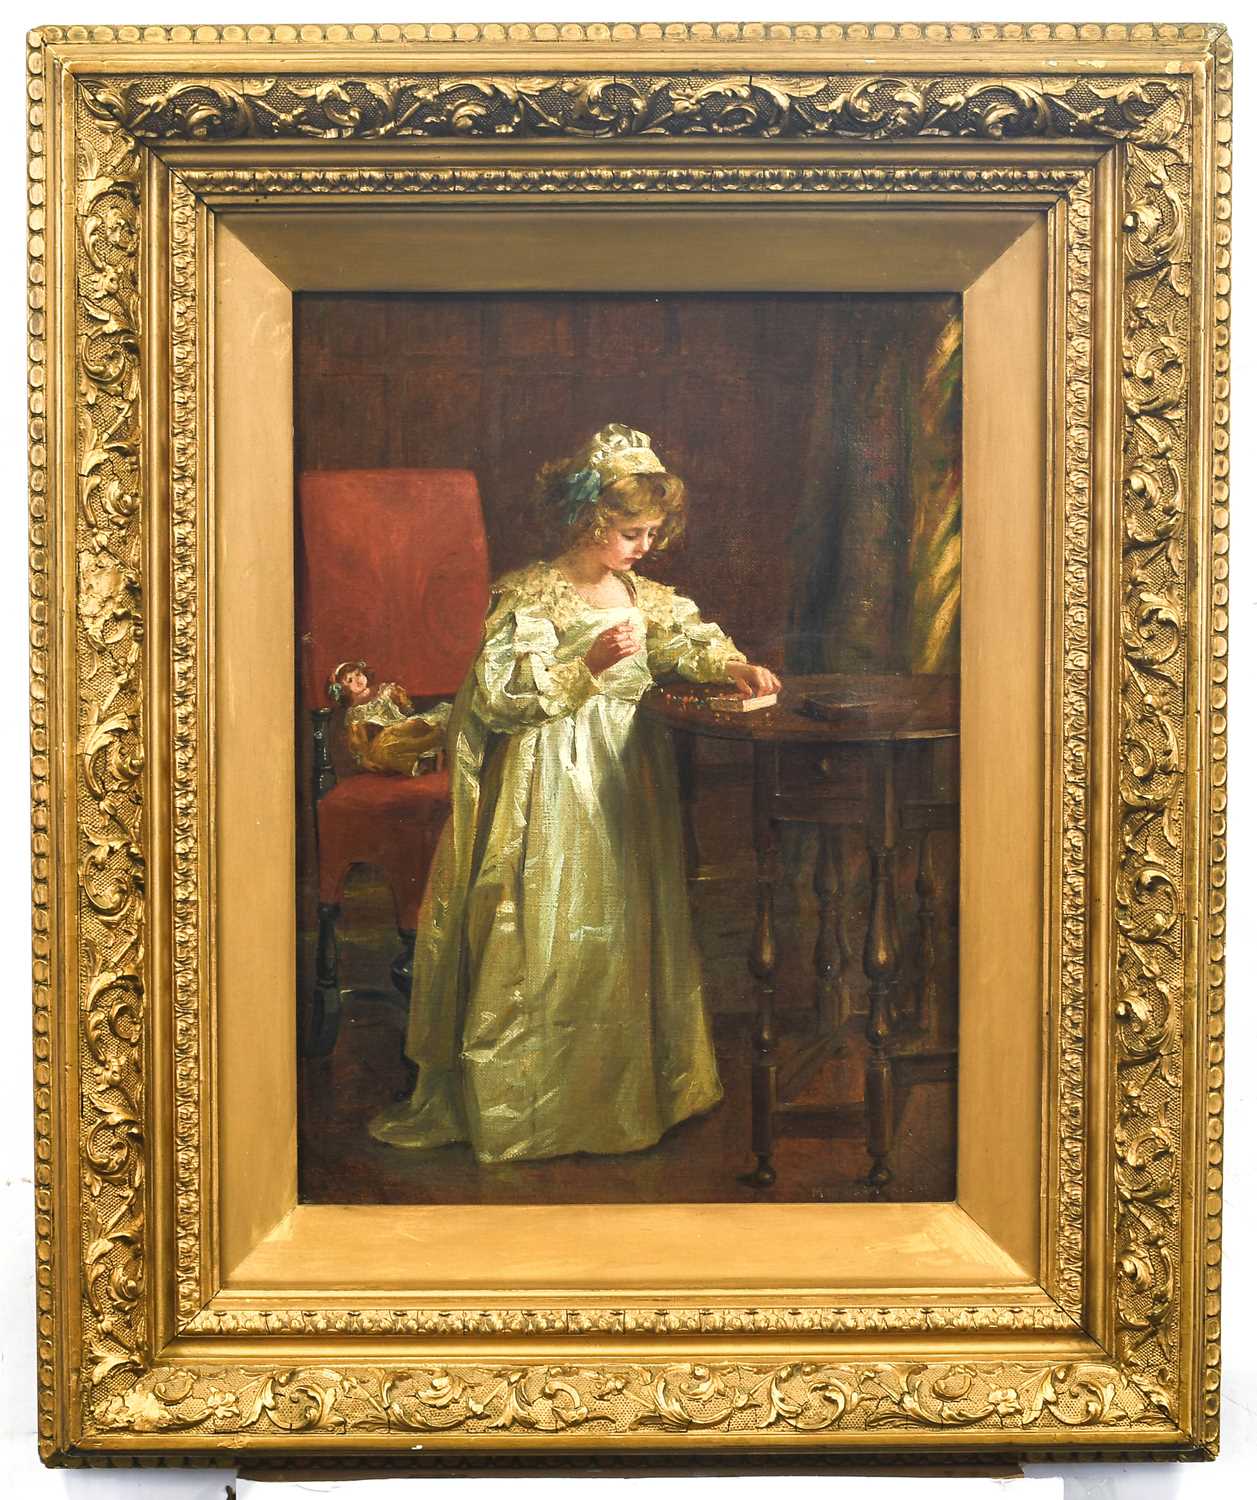 British School (Later 19th Century) Stringing a necklace - young lady standing in an interior - Image 2 of 11